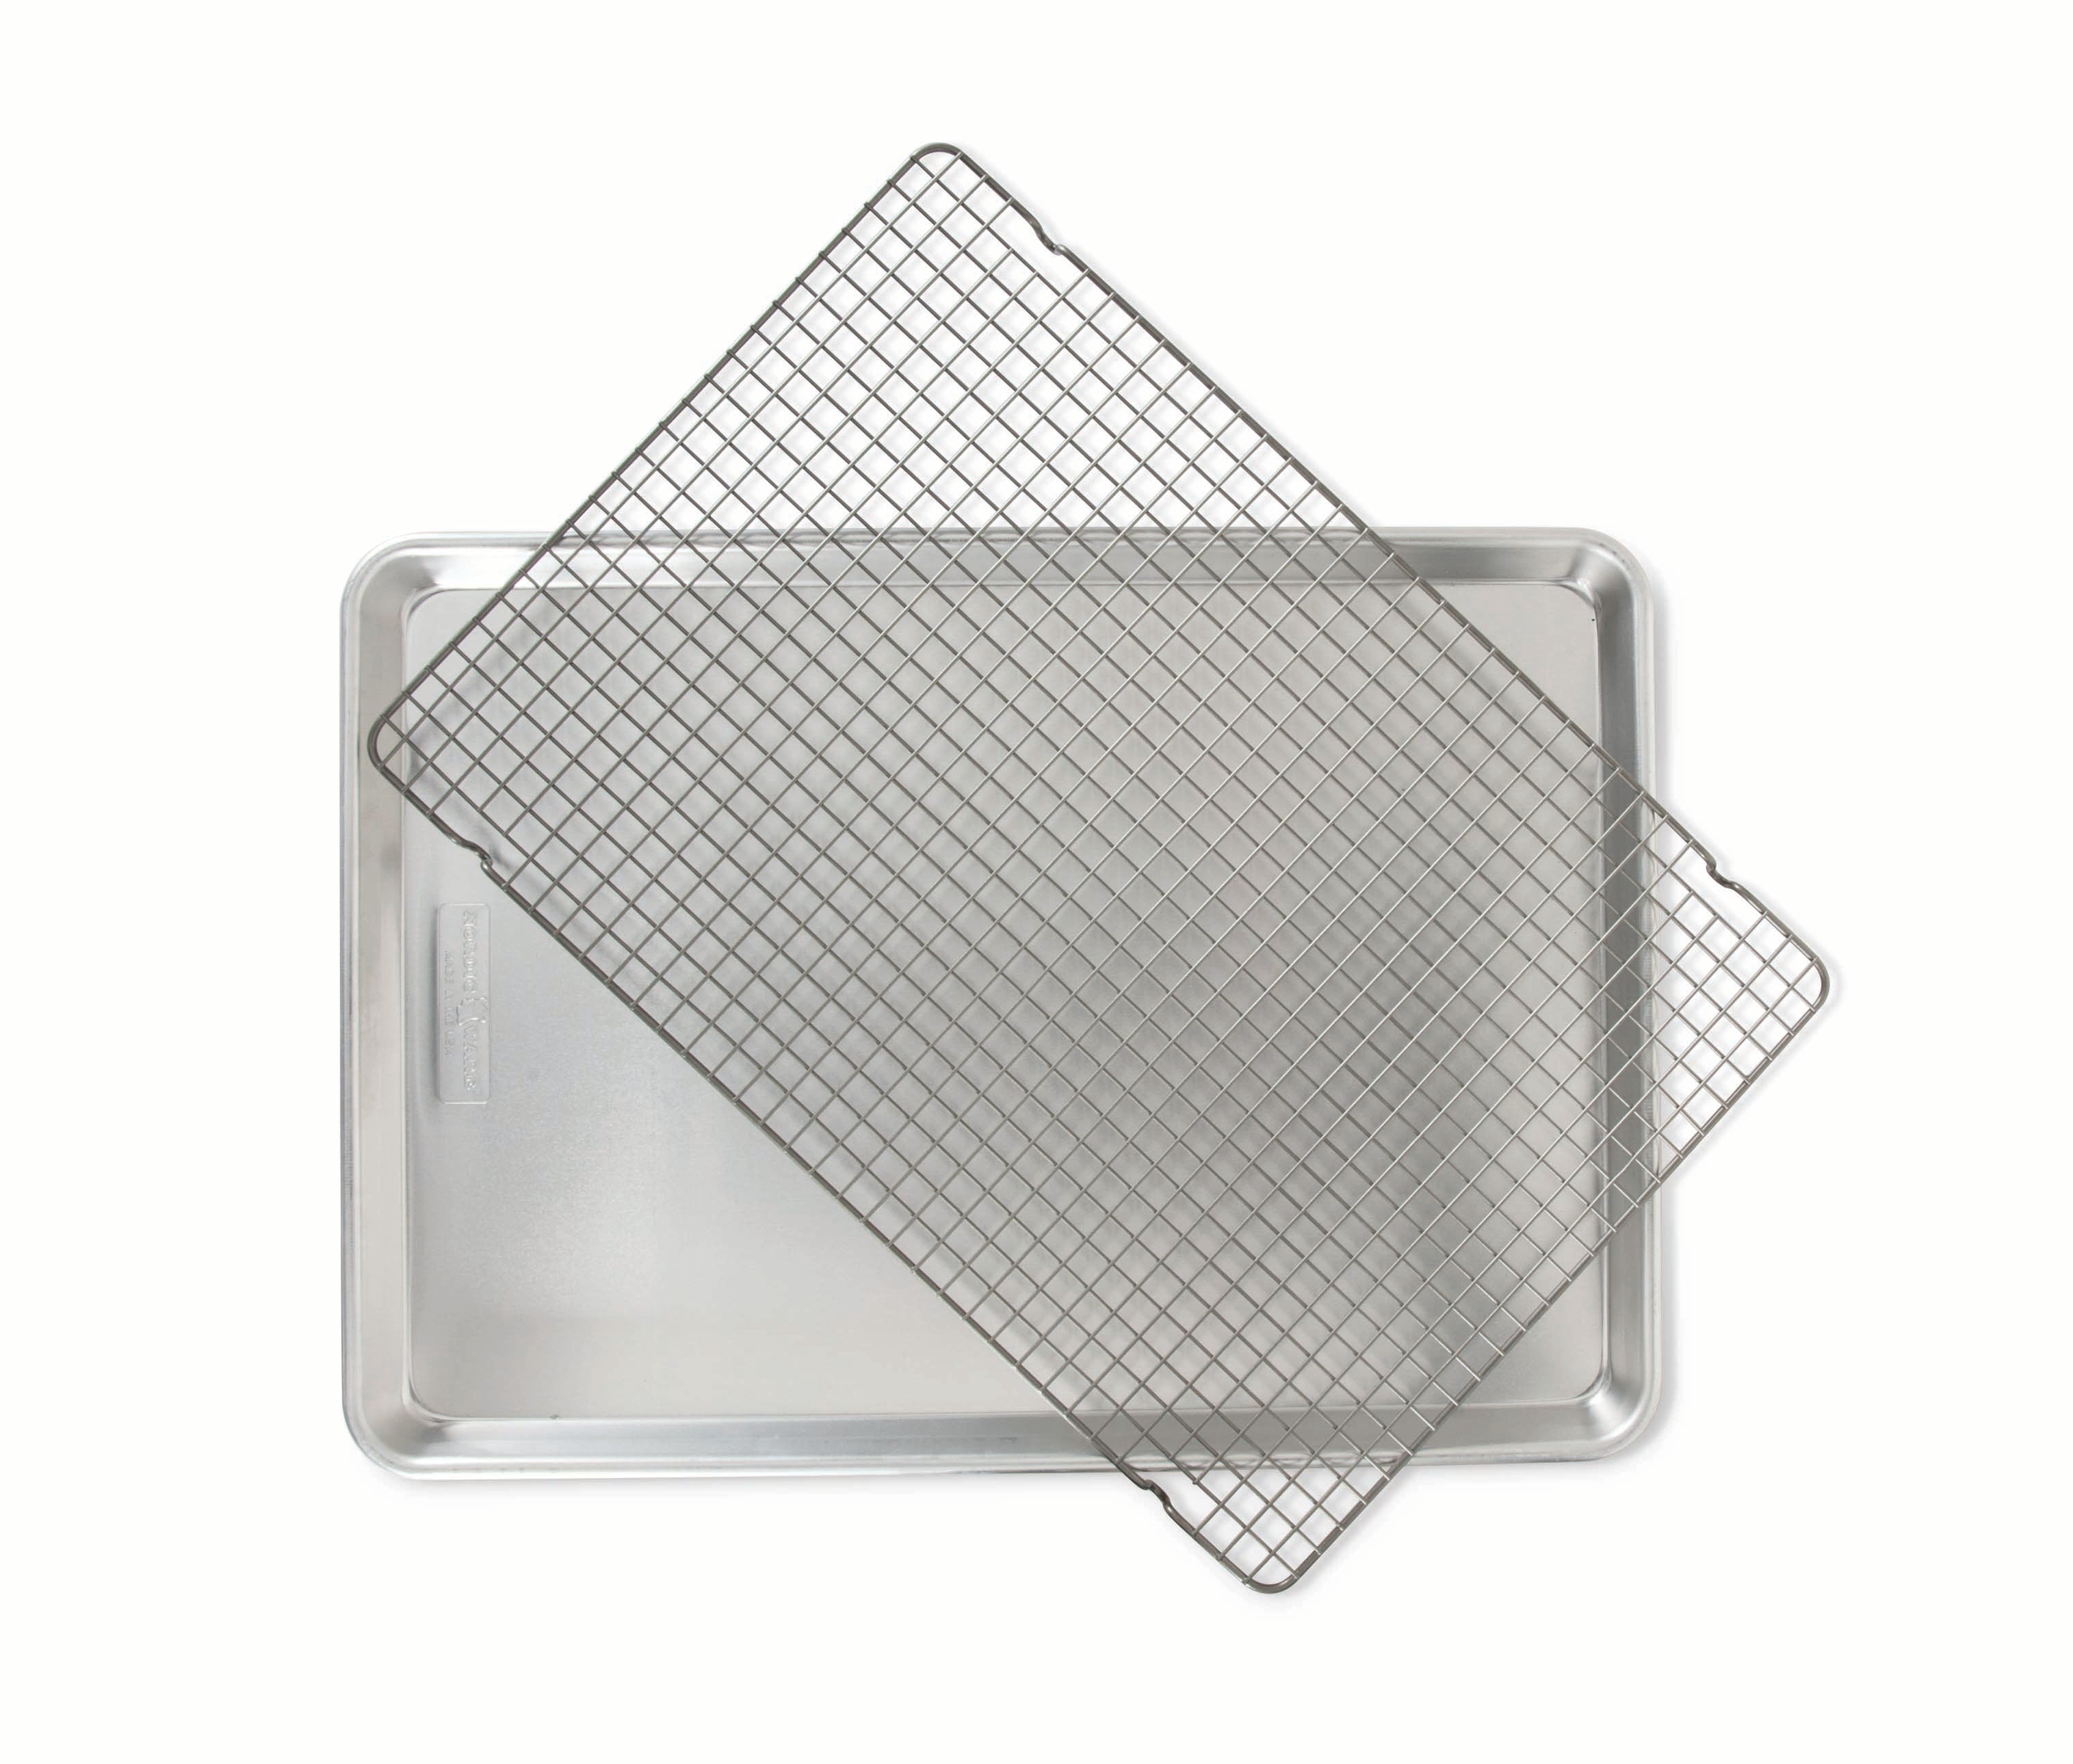 Nordic Ware Naturals¬® Big Sheet with Oven-Safe Nonstick Grid